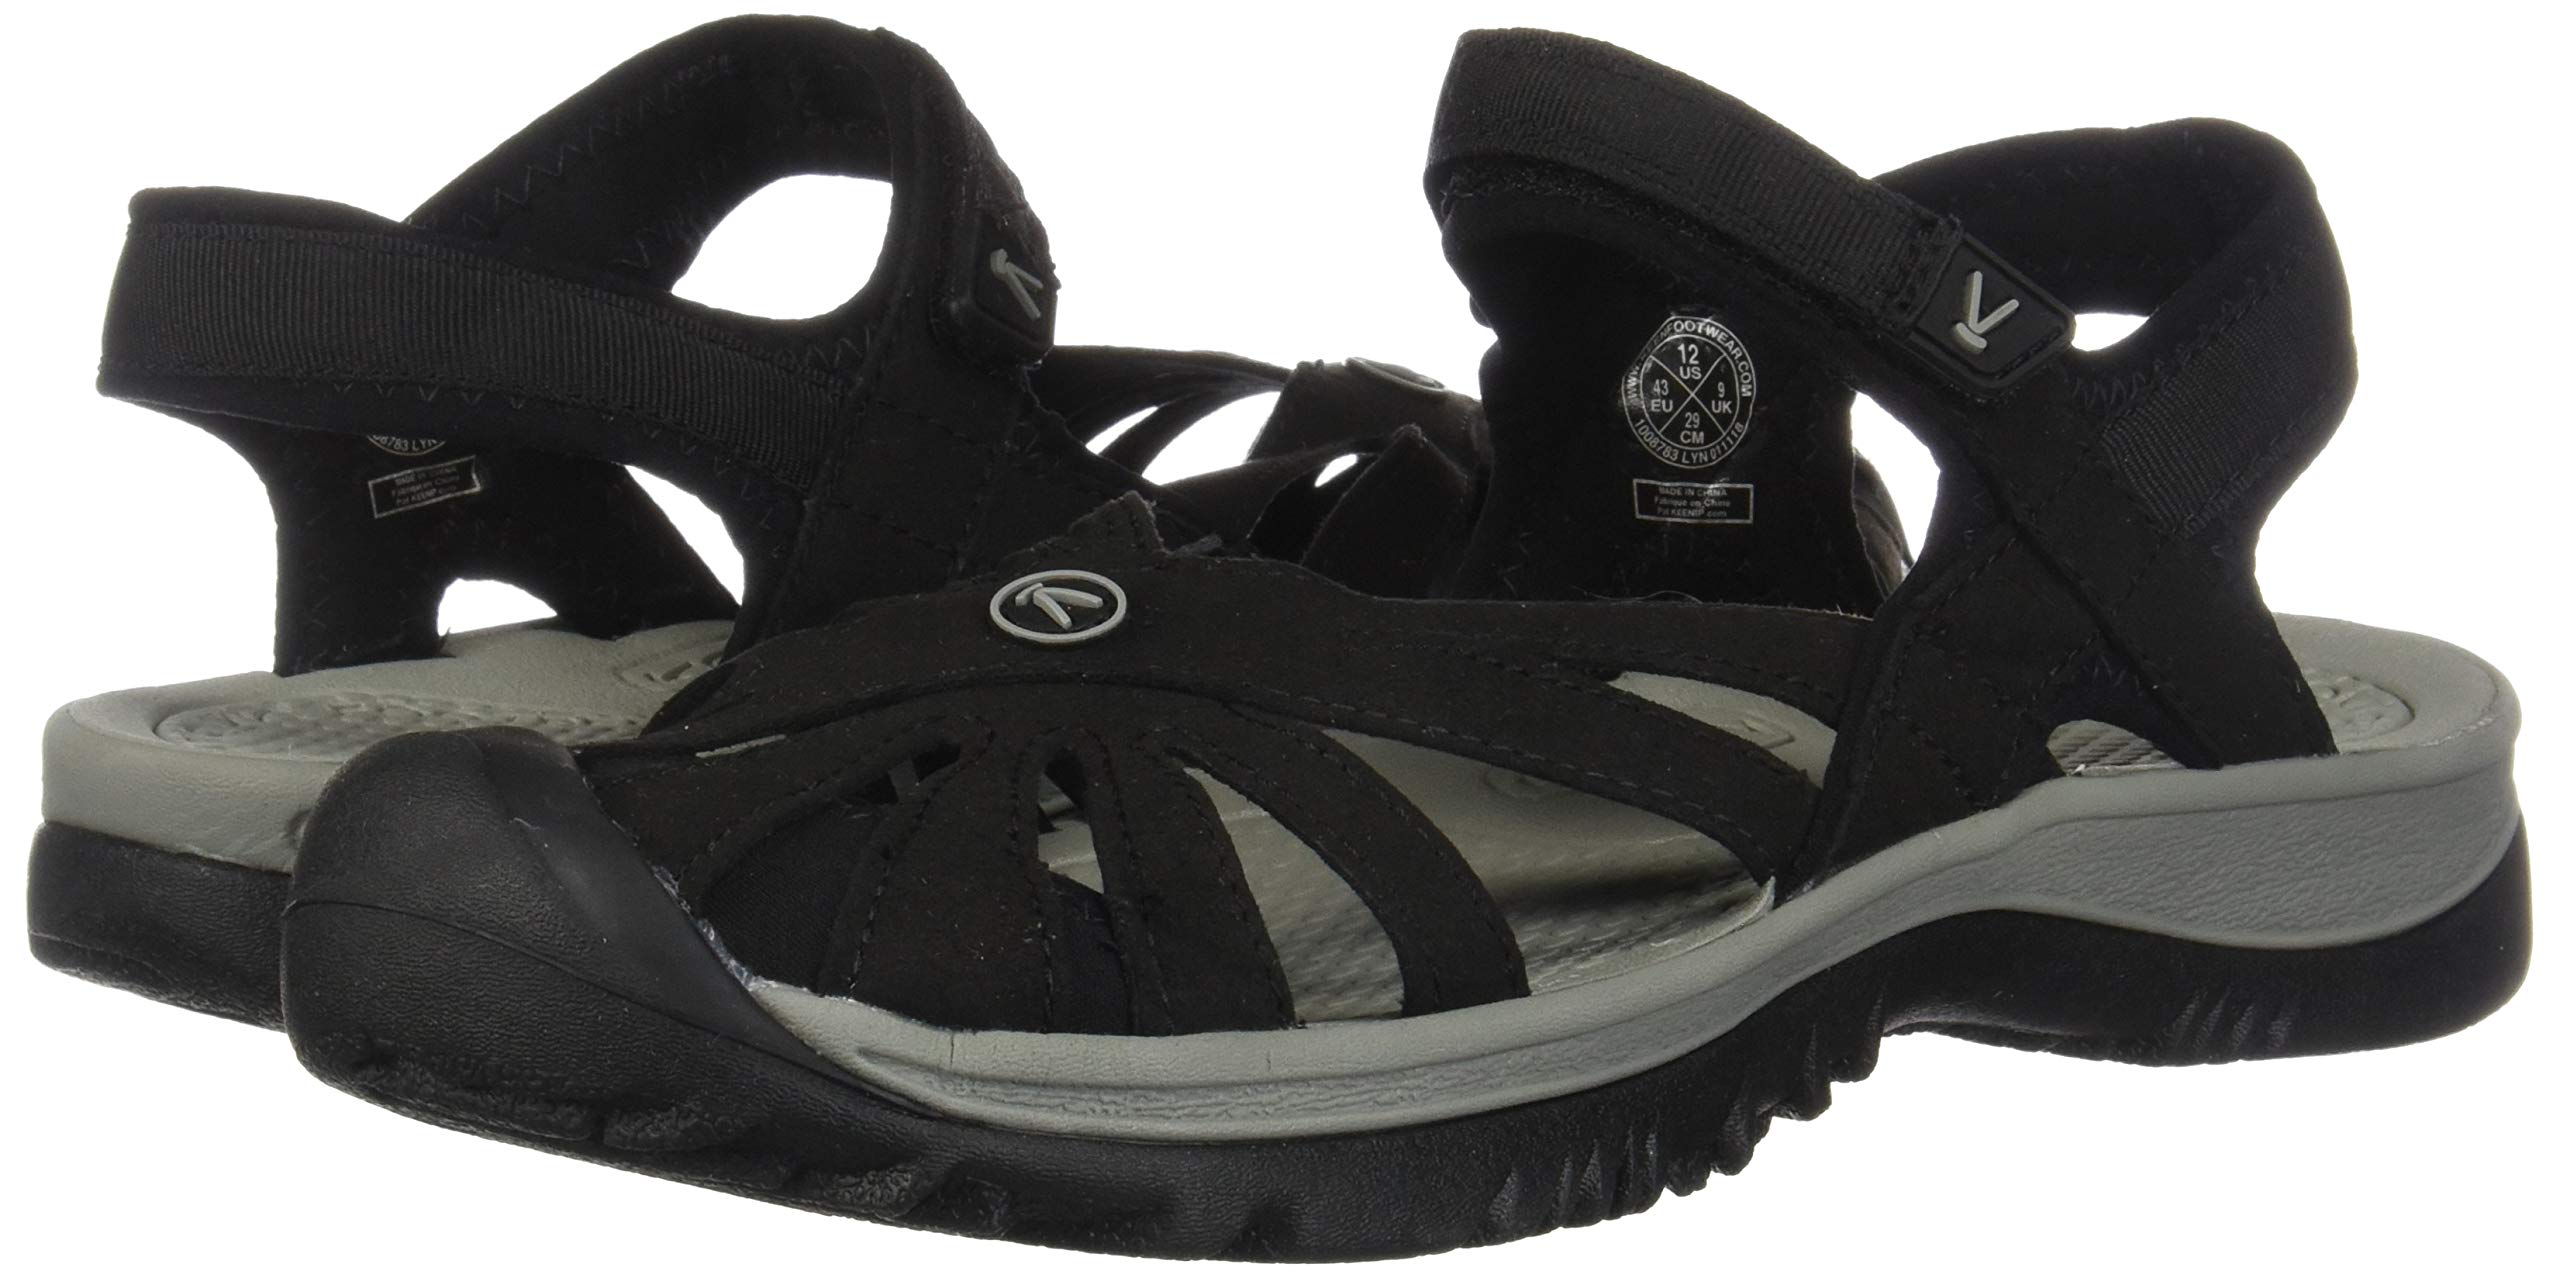 KEEN Women's Rose Casual Closed Toe Sandals